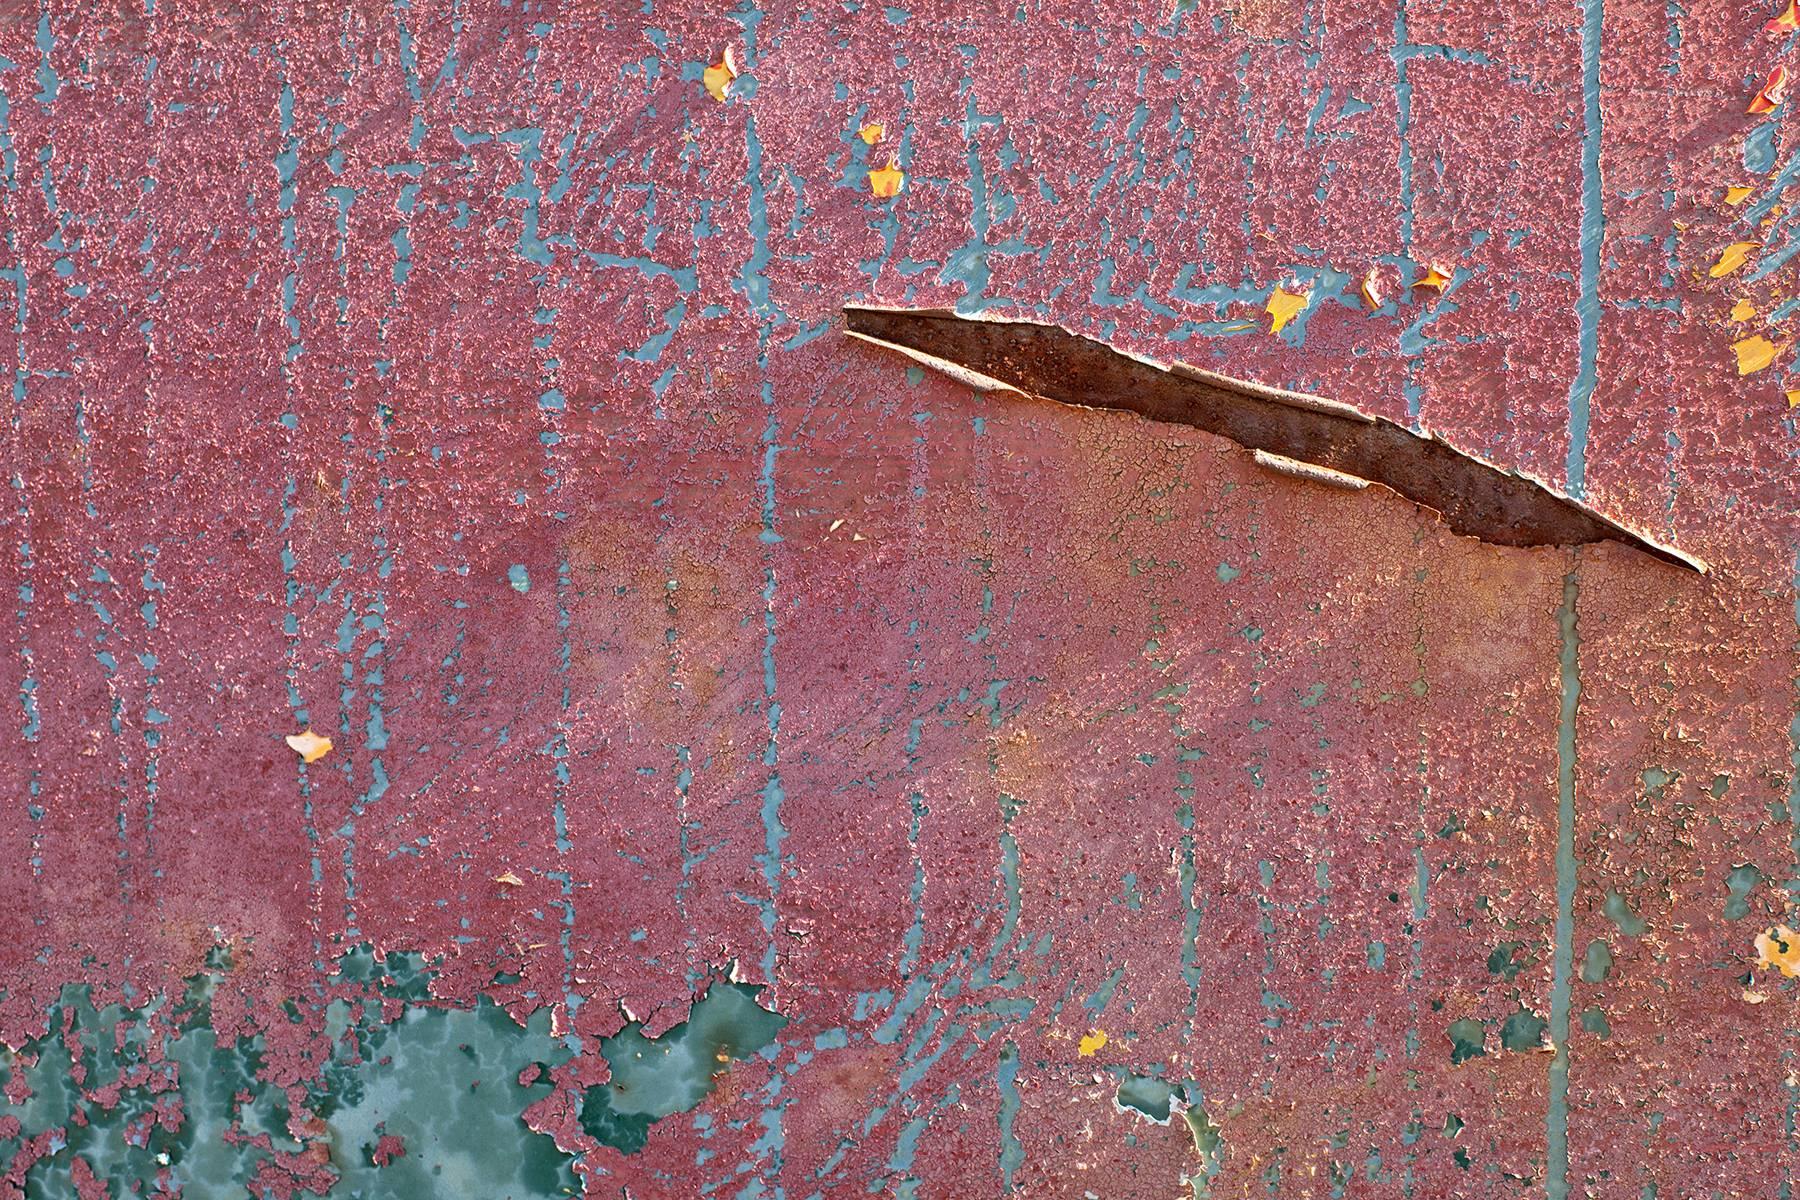 "Rip", color photograph, abstract, texture, rusted, weathered, pink, blue